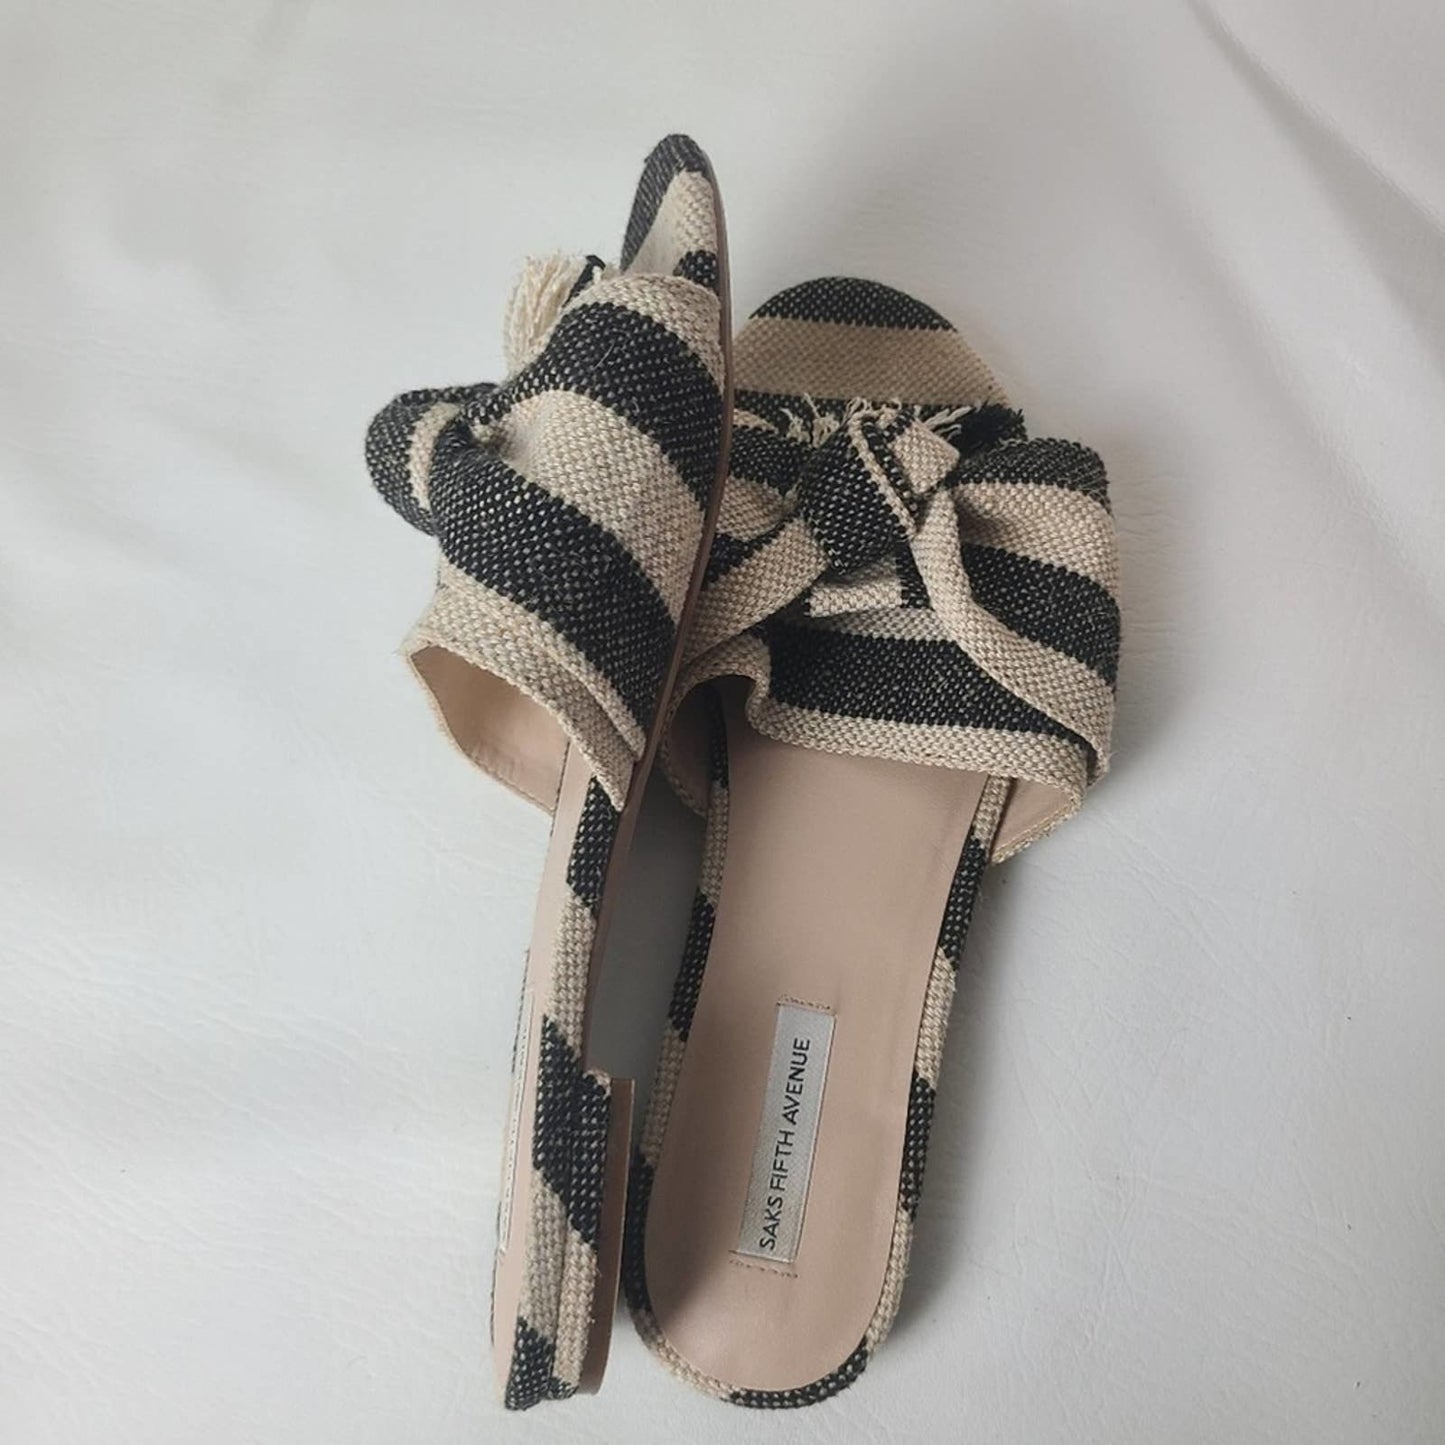 Saks Fifth Ave Black and White Striped Slip On Sandals - 7